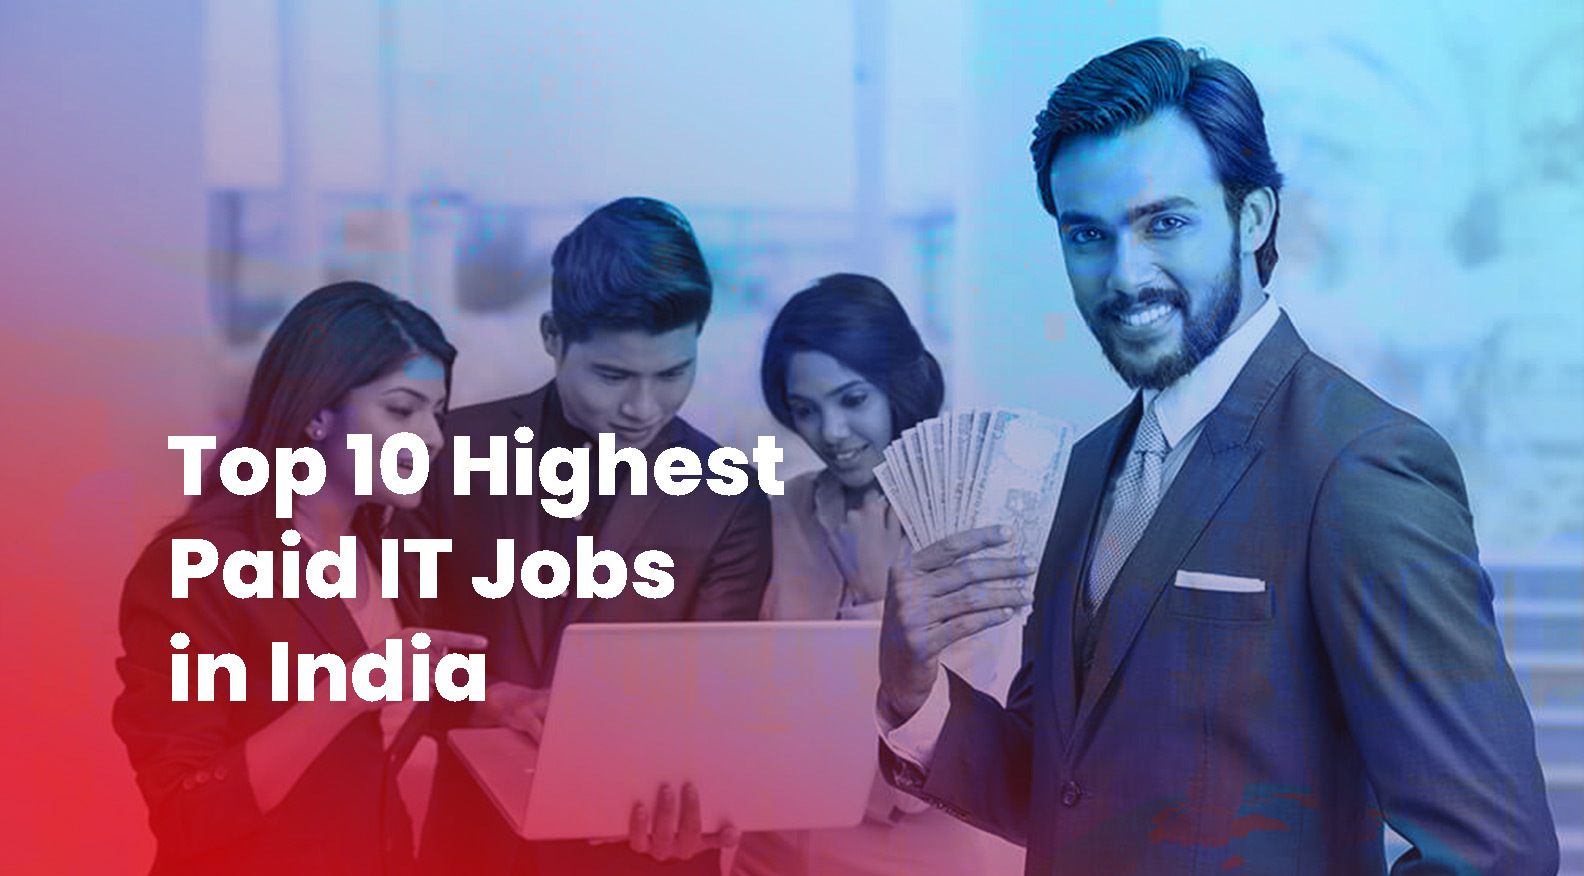 Top 10 Highest Paid IT Jobs in India